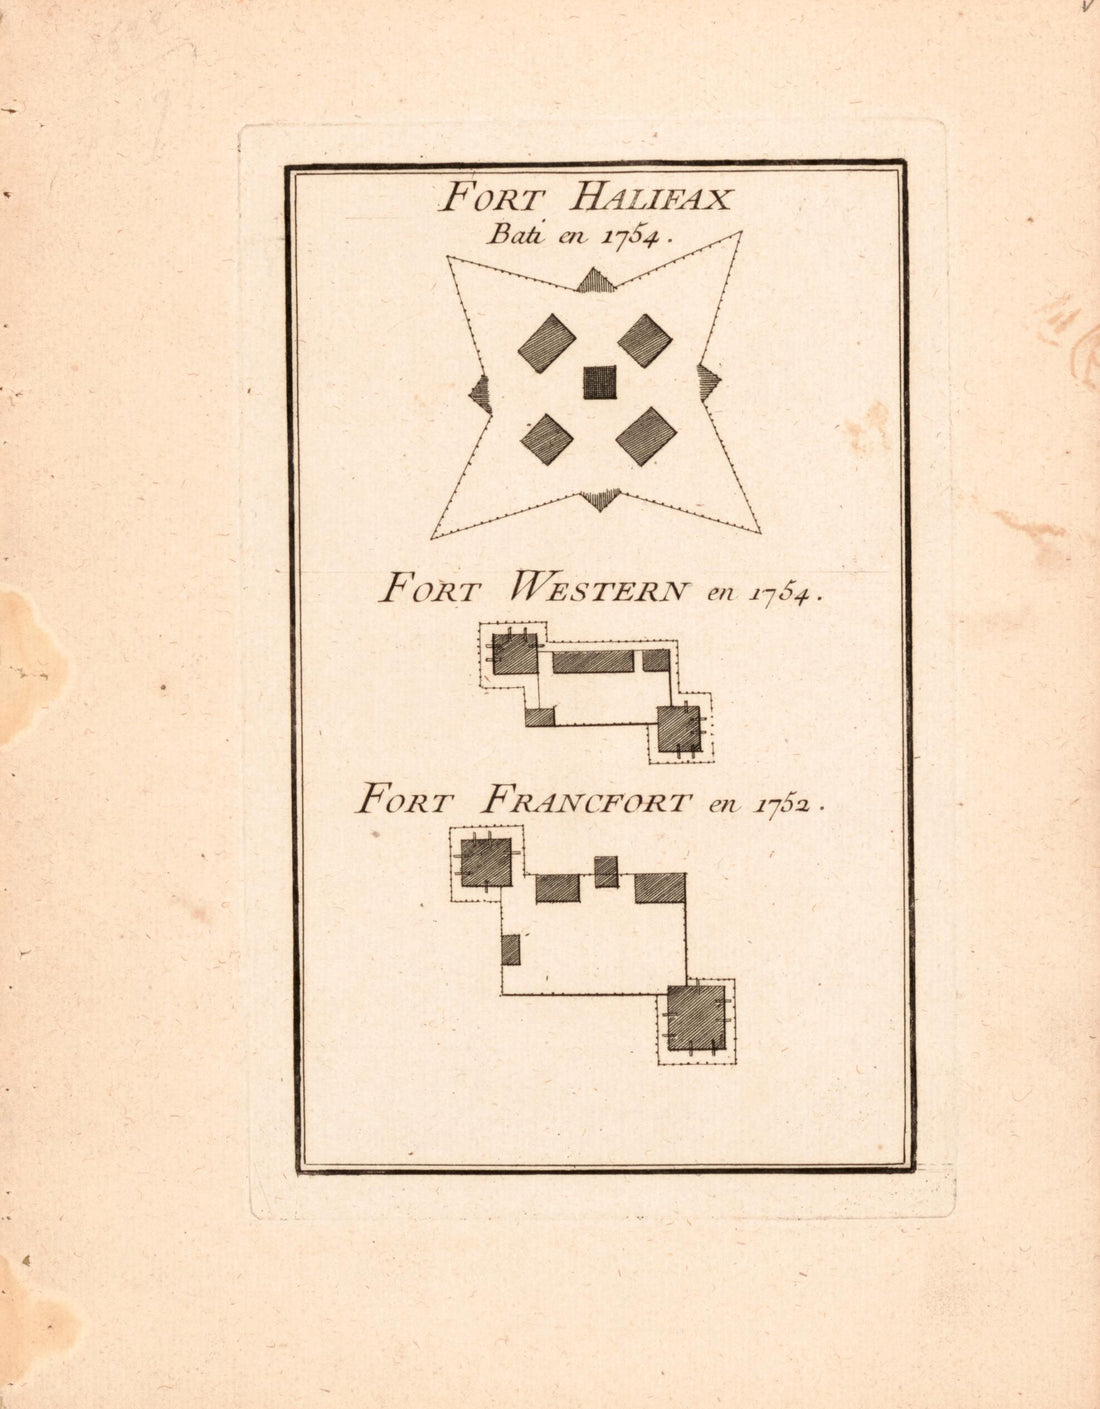 This old map of Plans of Fort Halifax In Nova Scotia and Fort Western and Fort Francfort In Maine from 1755 was created by  Louis in 1755